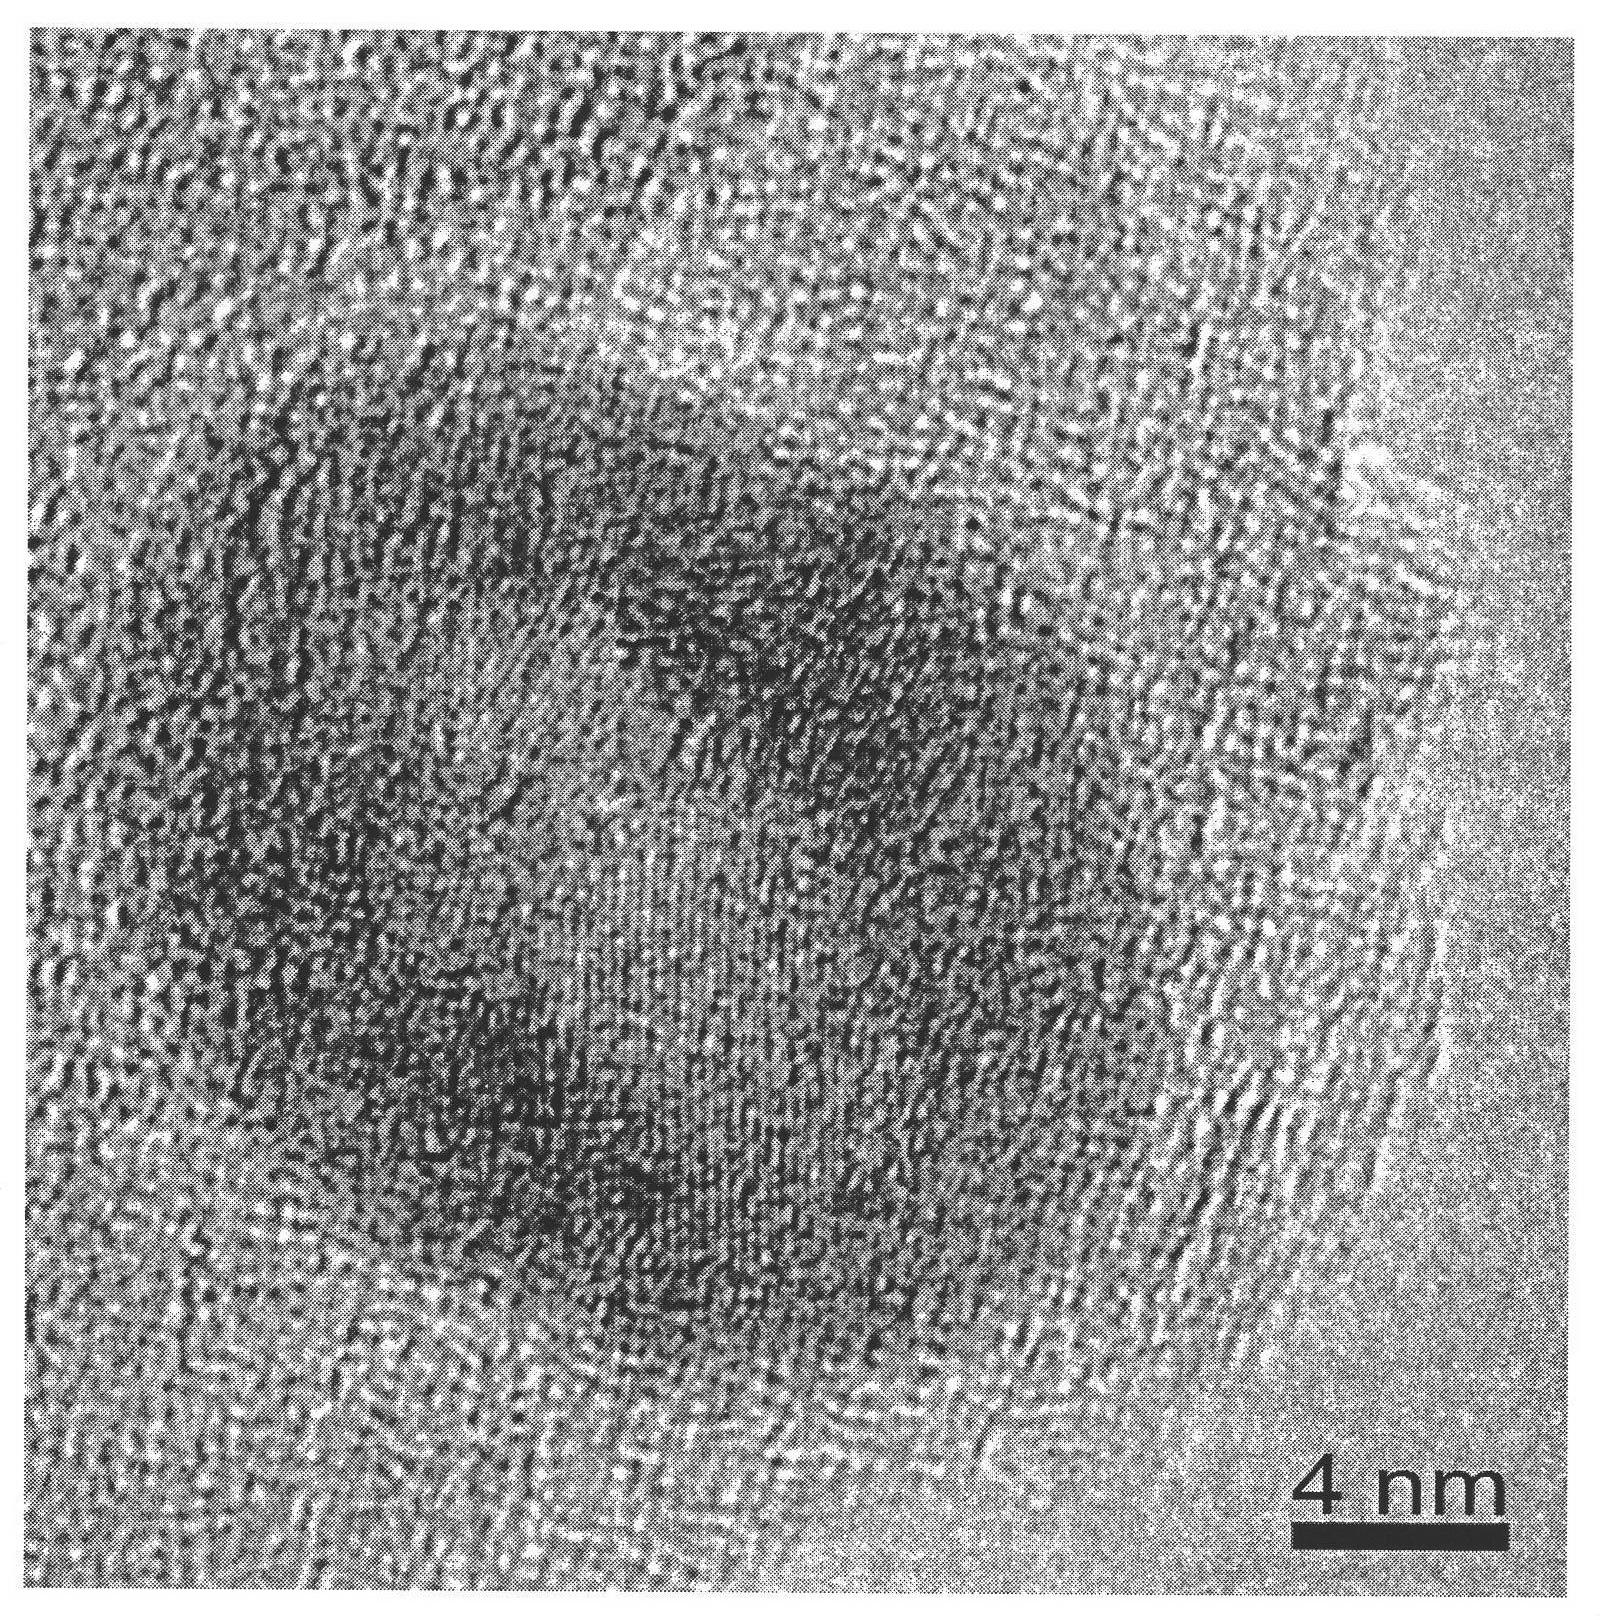 Preparation method of carbon-coated transition metal nano hollow particle